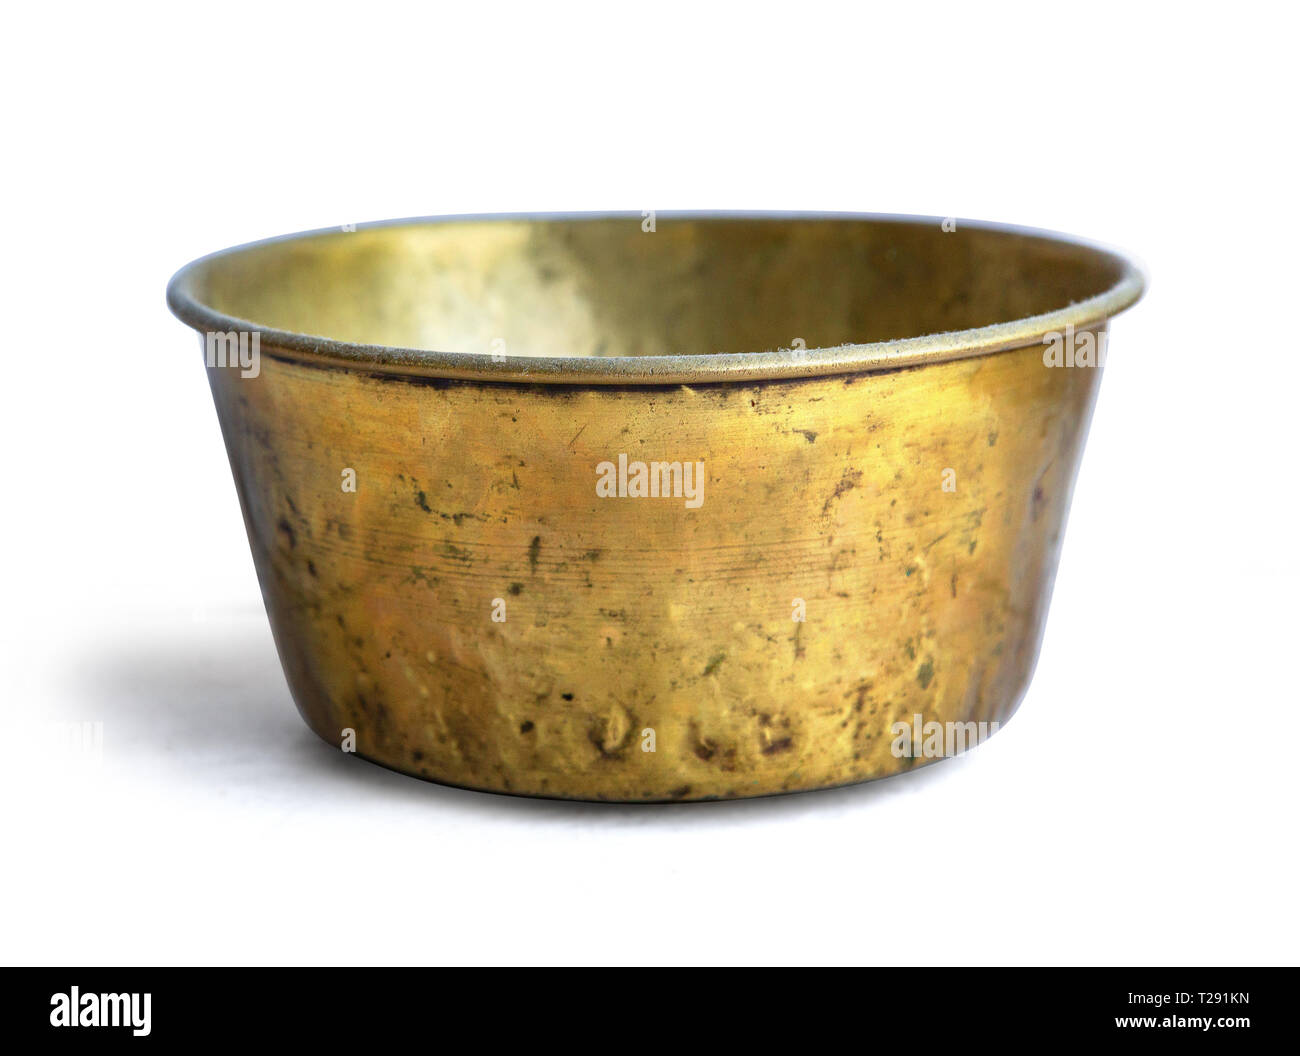 https://c8.alamy.com/comp/T291KN/antique-copper-bowl-for-pot-plant-isolated-on-white-with-clipping-path-T291KN.jpg